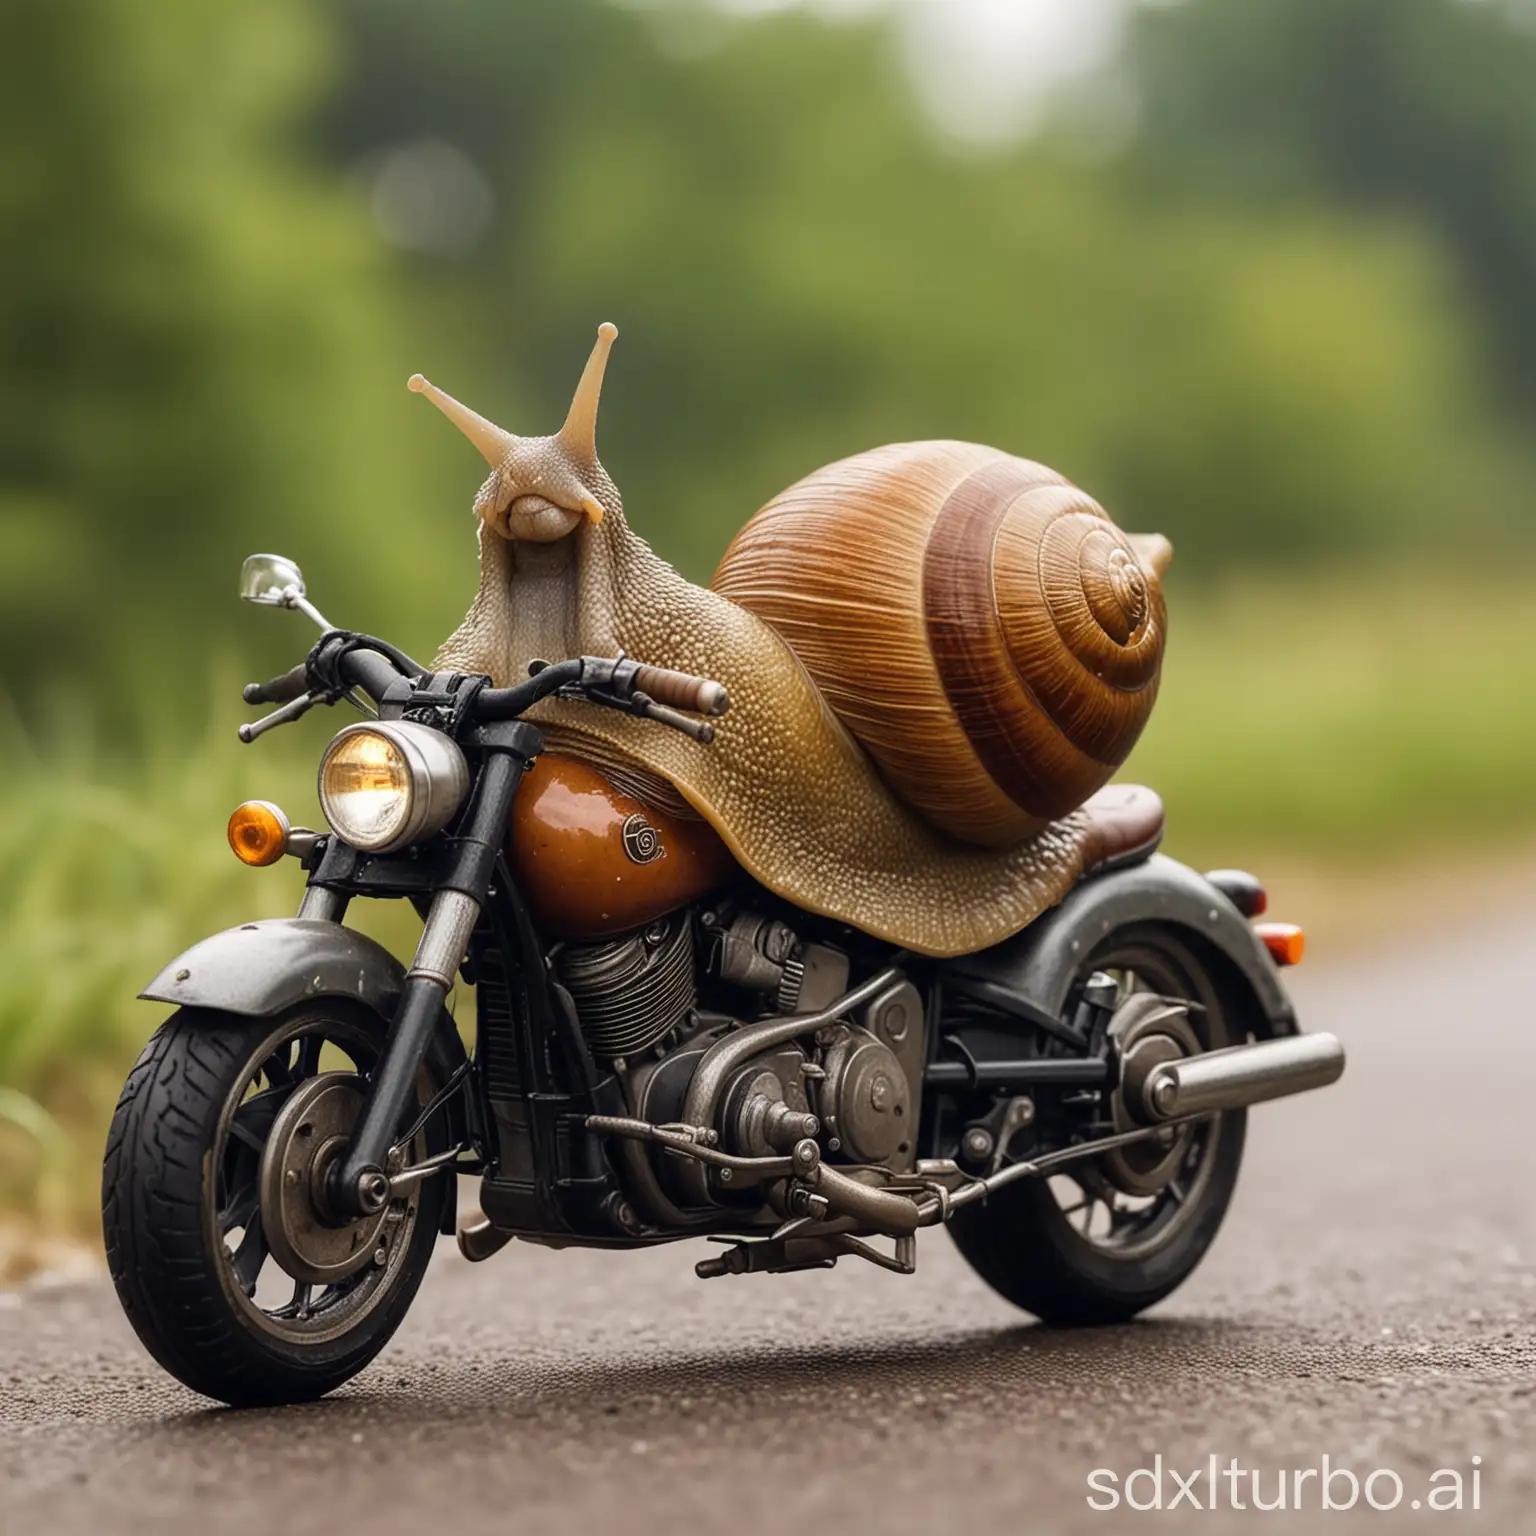 SNAIL RIDING A MOTORCYCLE